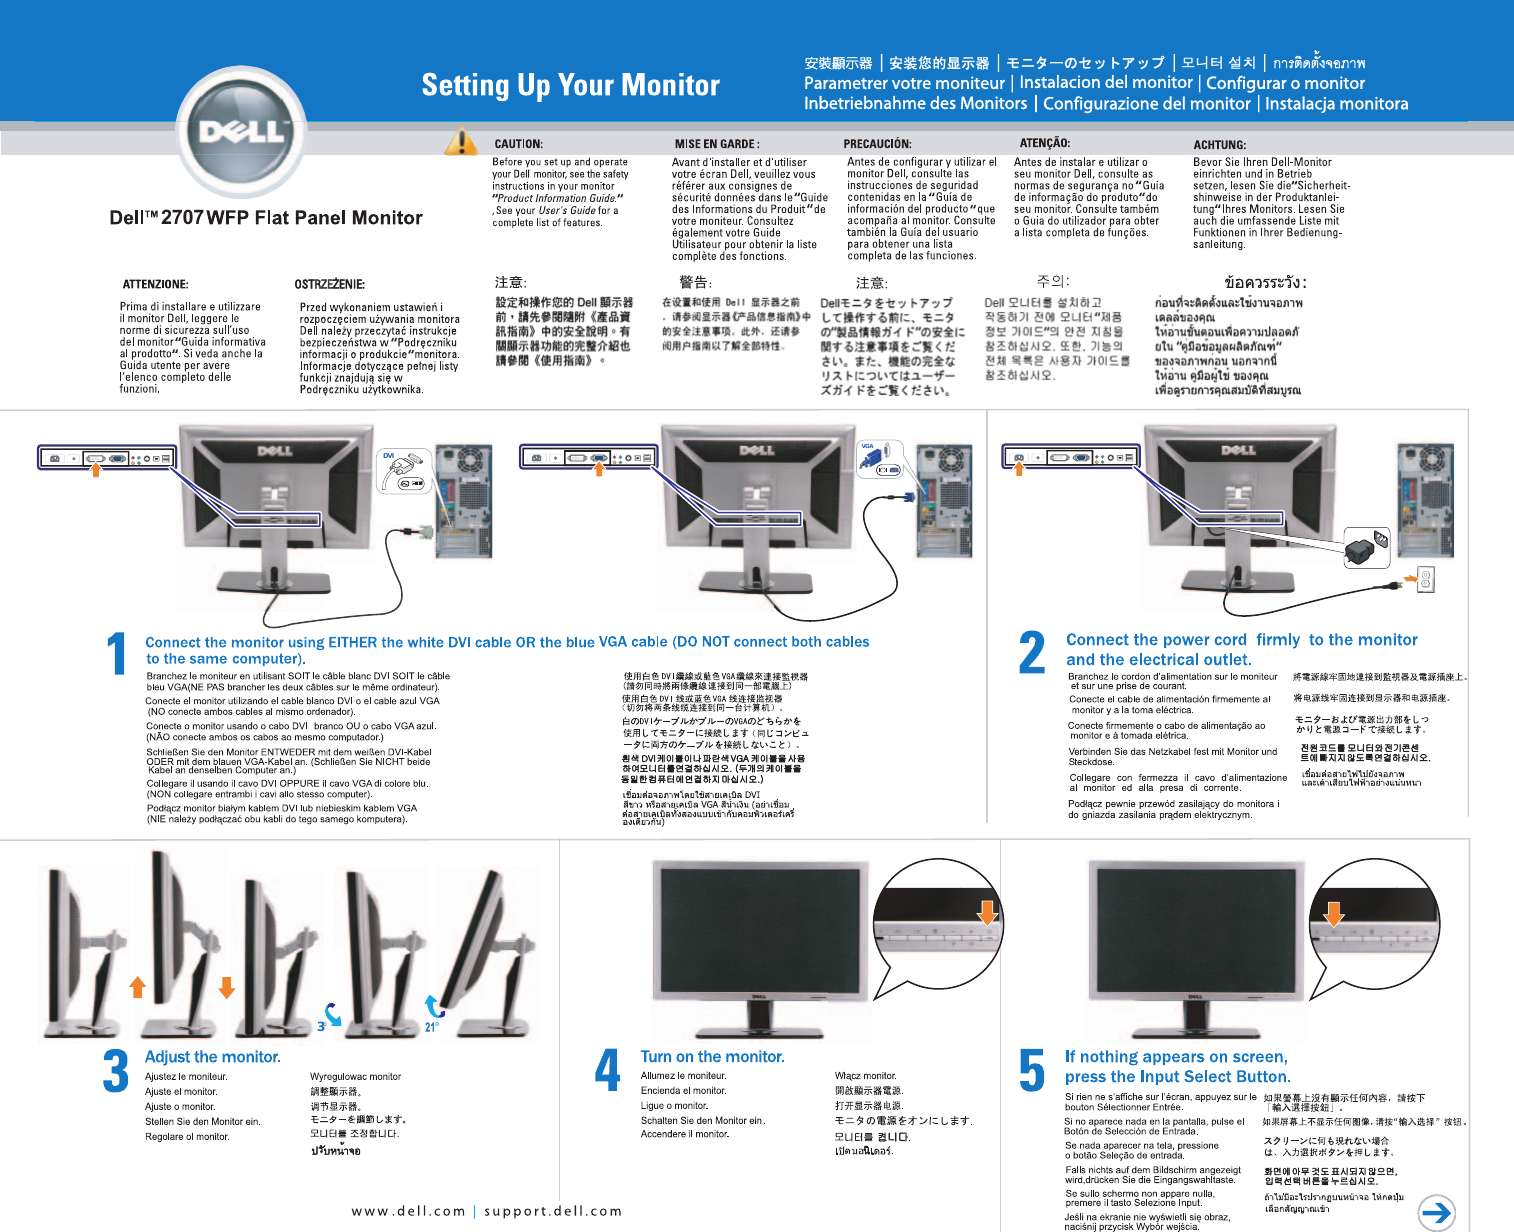 instructions for the dell e207wfp